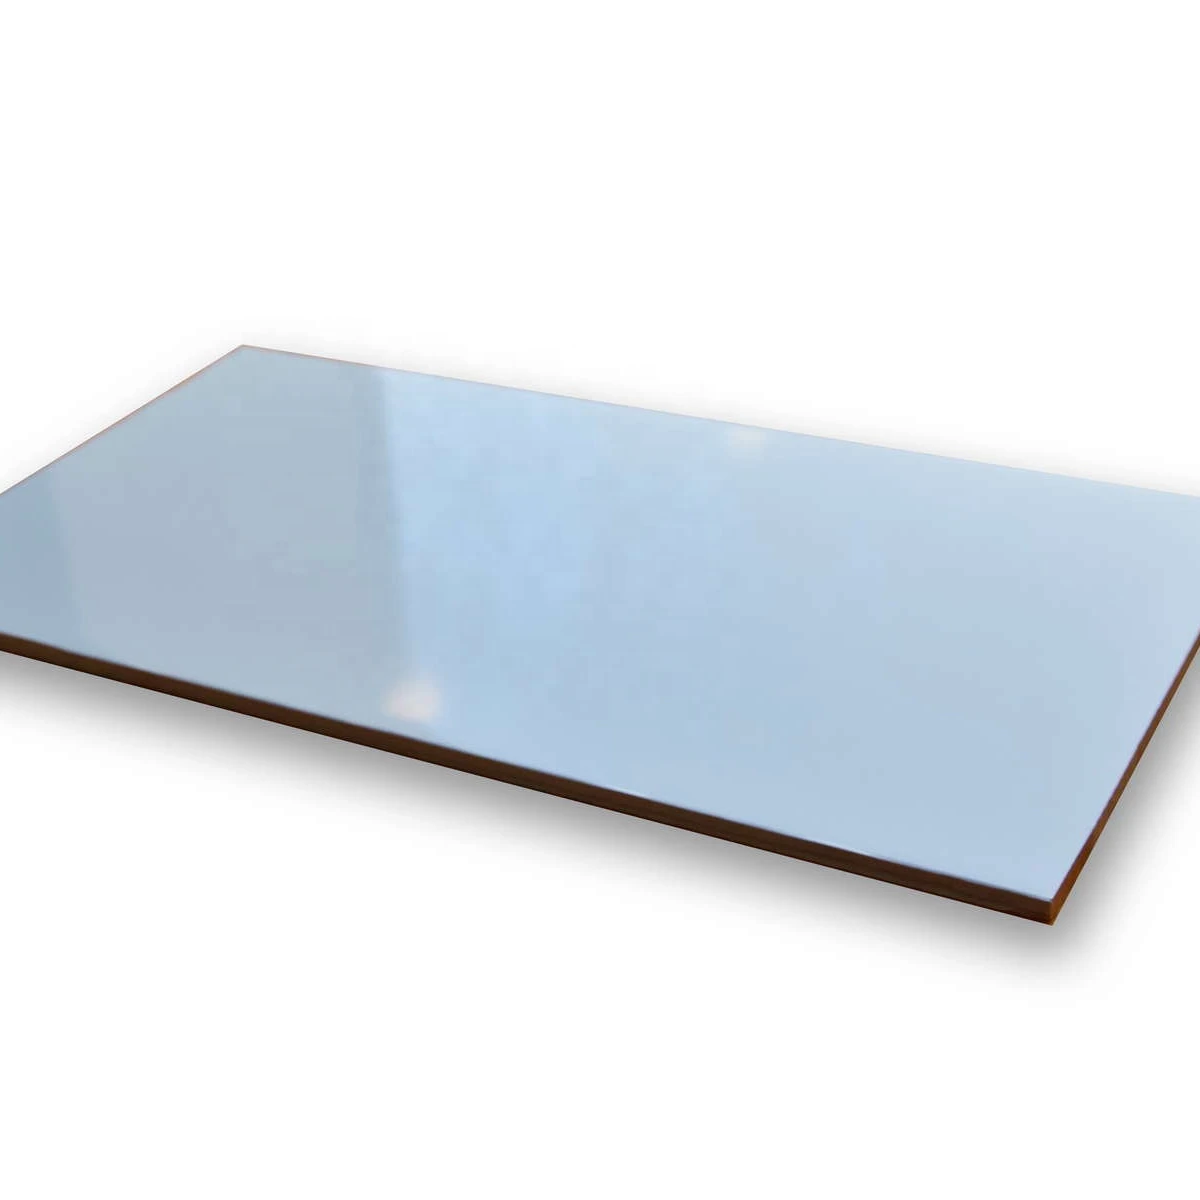 Hydro-solve Blue top photosensitive etching magnesium plate or sheet for quicker heats up